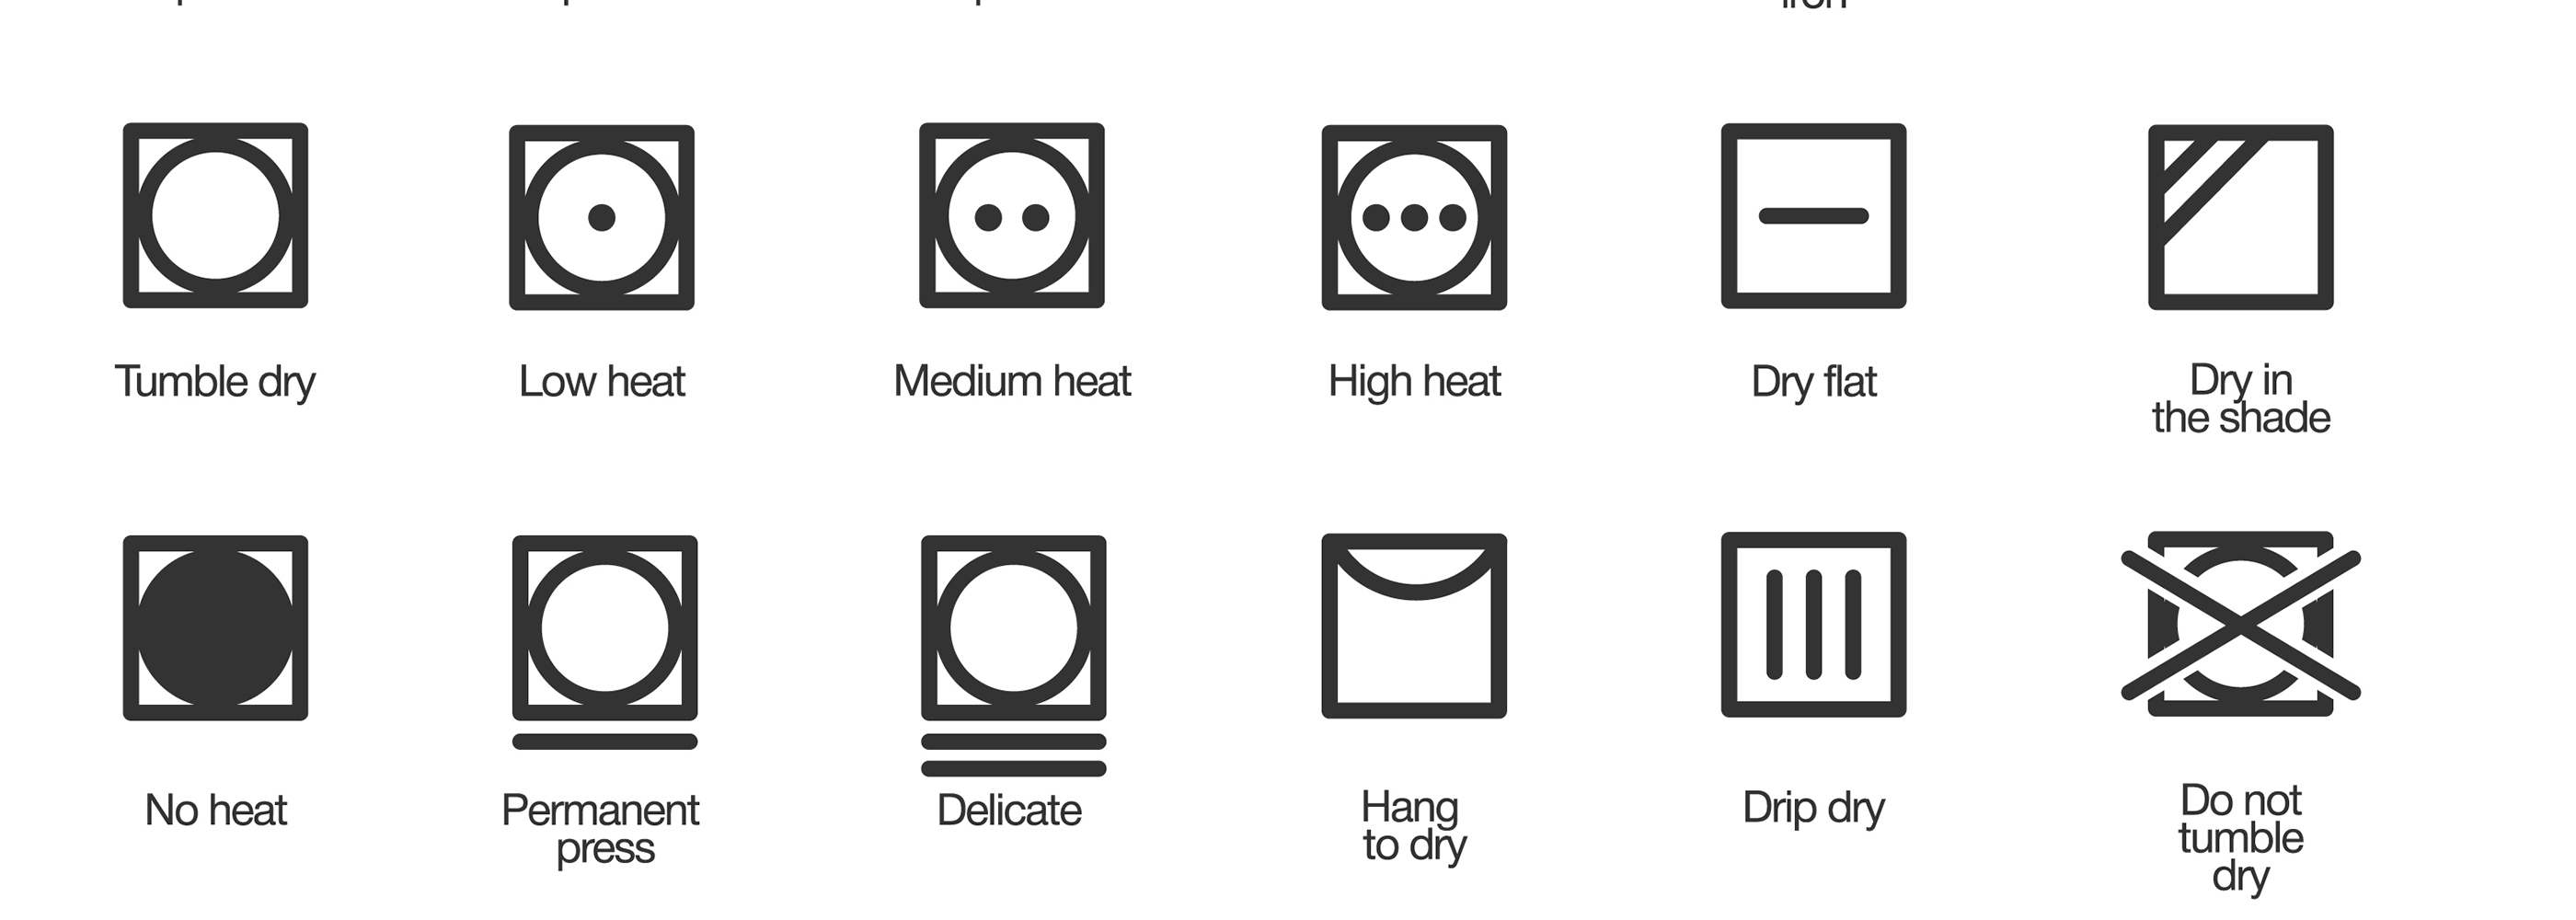 drying icons on the laundry symbols chart